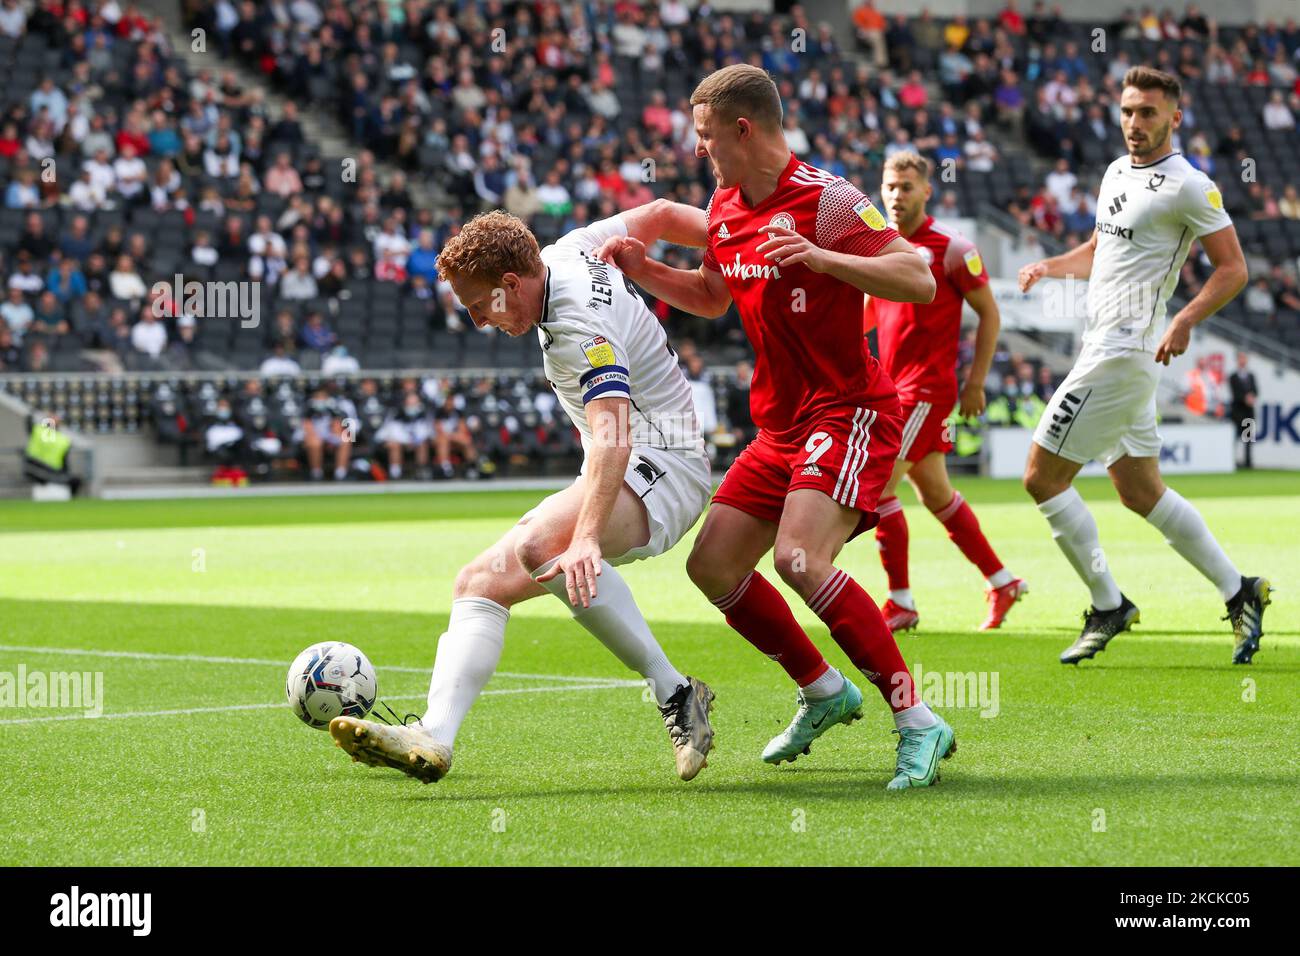 Milton Keynes Dons captain Dean Lewington covers the ball from Accrington Stanley's Colby Bishop during the first half of the Sky Bet League One match between MK Dons and Accrington Stanley at Stadium MK, Milton Keynes on Saturday 28th August 2021. (Photo by John Cripps/MI News/NurPhoto) Stock Photo